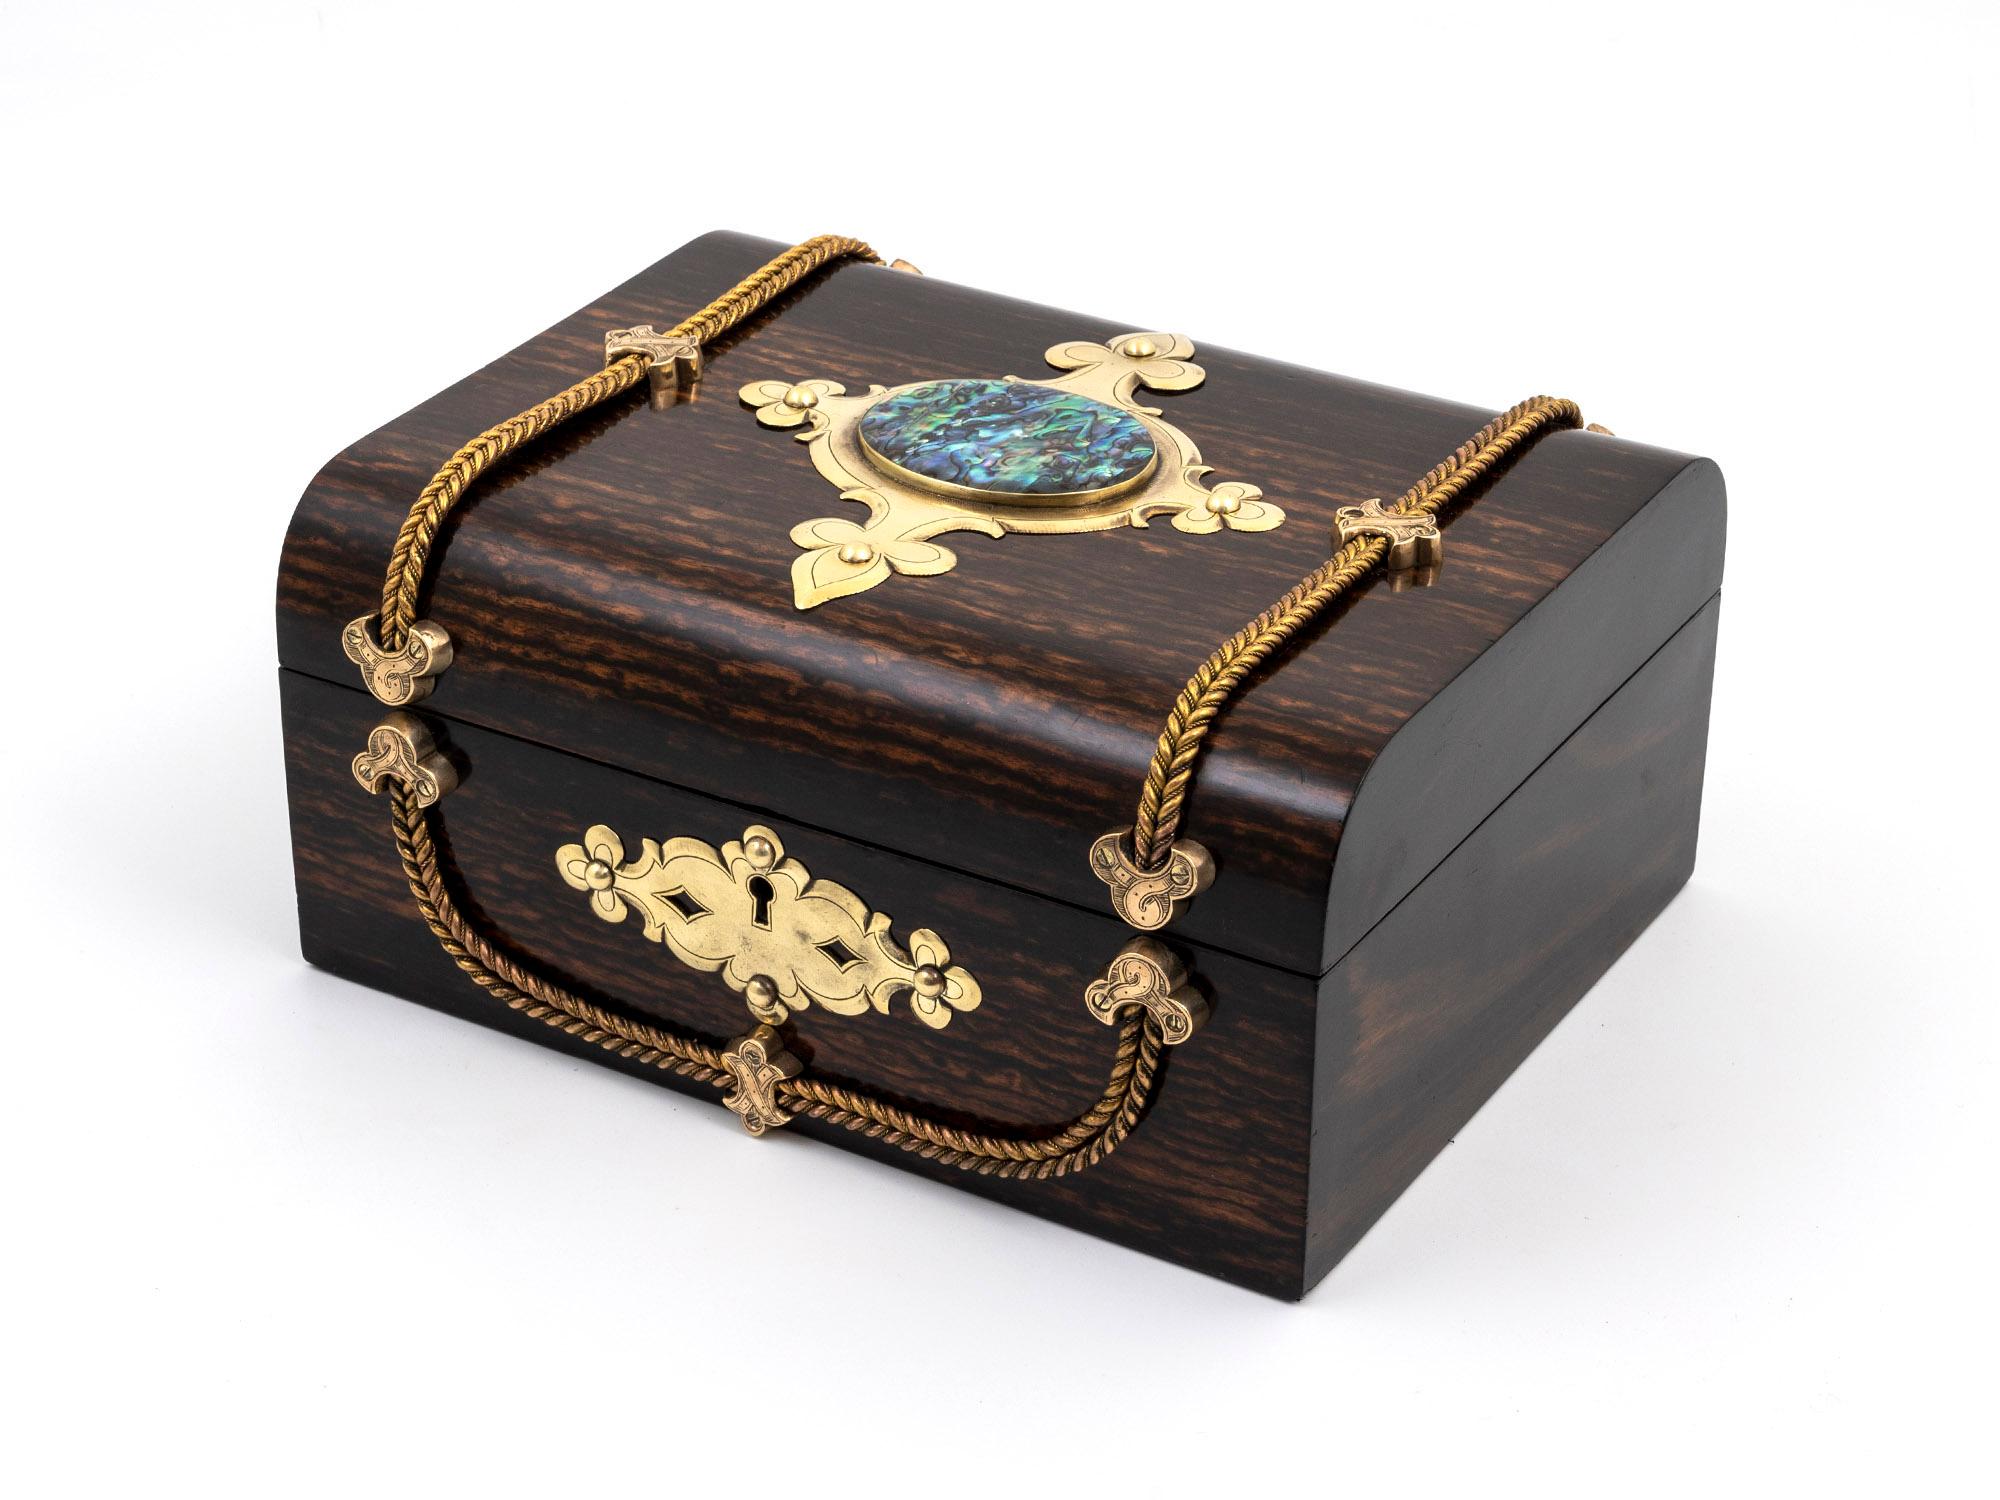 British 19th Century Antique Dome-Top Jewellery Box with Abalone Medallion